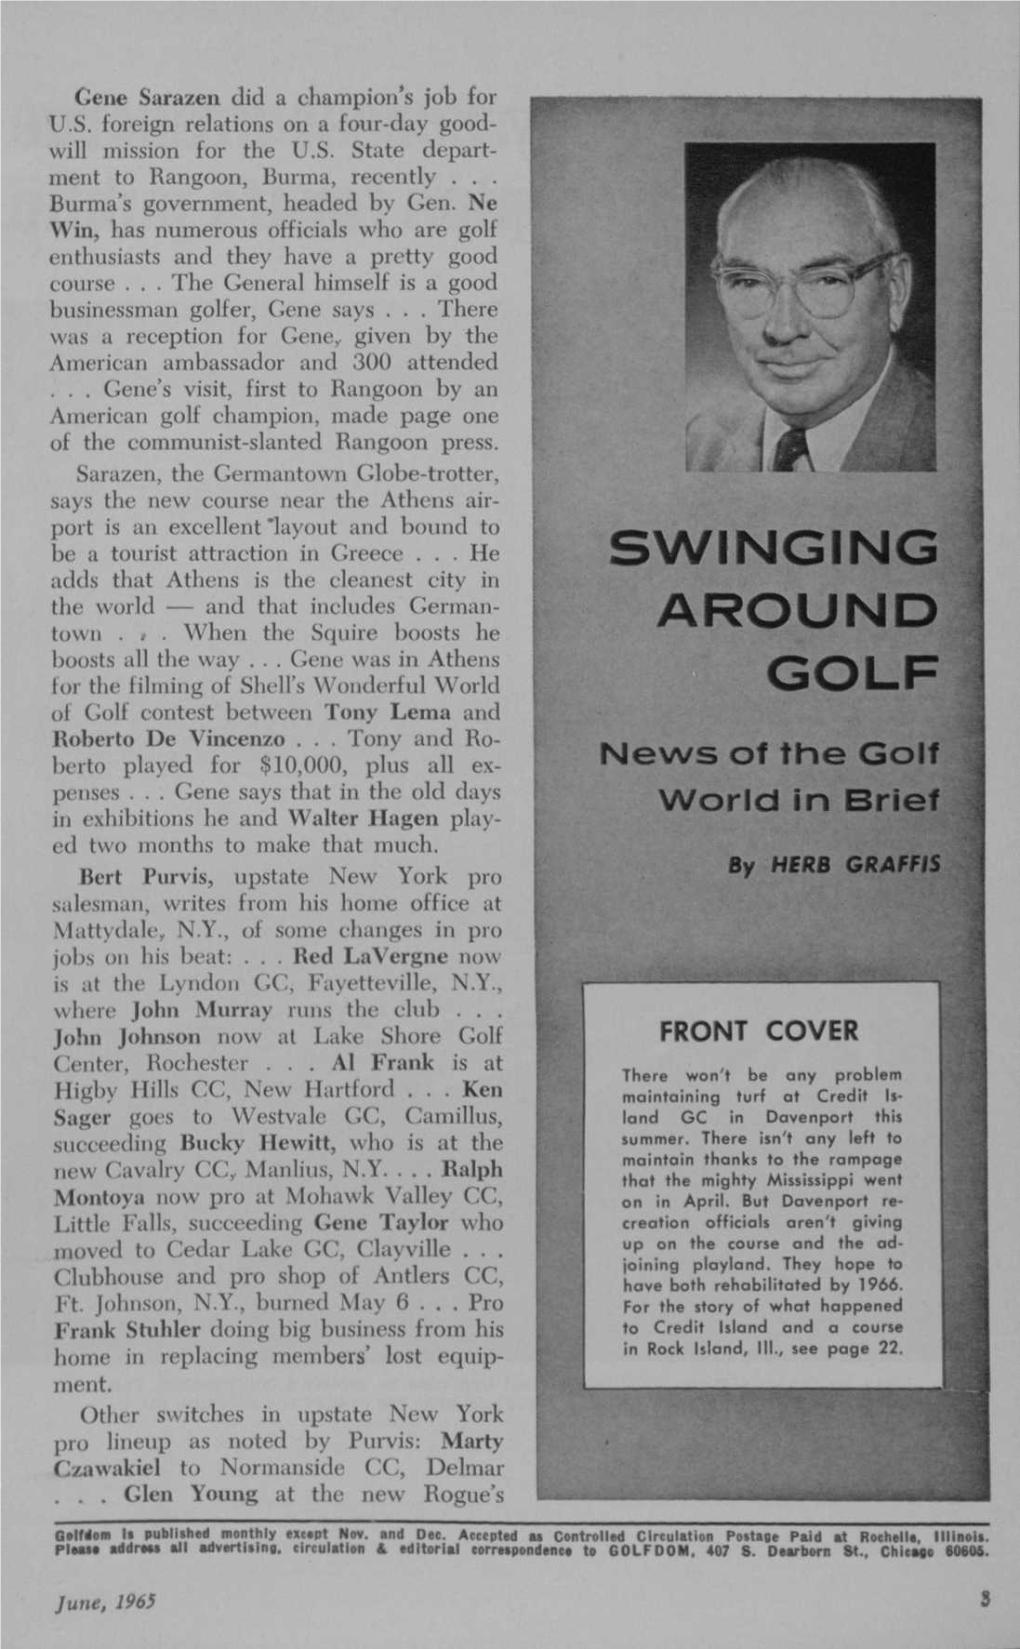 Swinging Around Golf (Continued from Page 20) Owner-Builder, Dewey Davis, Has Open- Ed His Oak Grove GC, 9-Holes